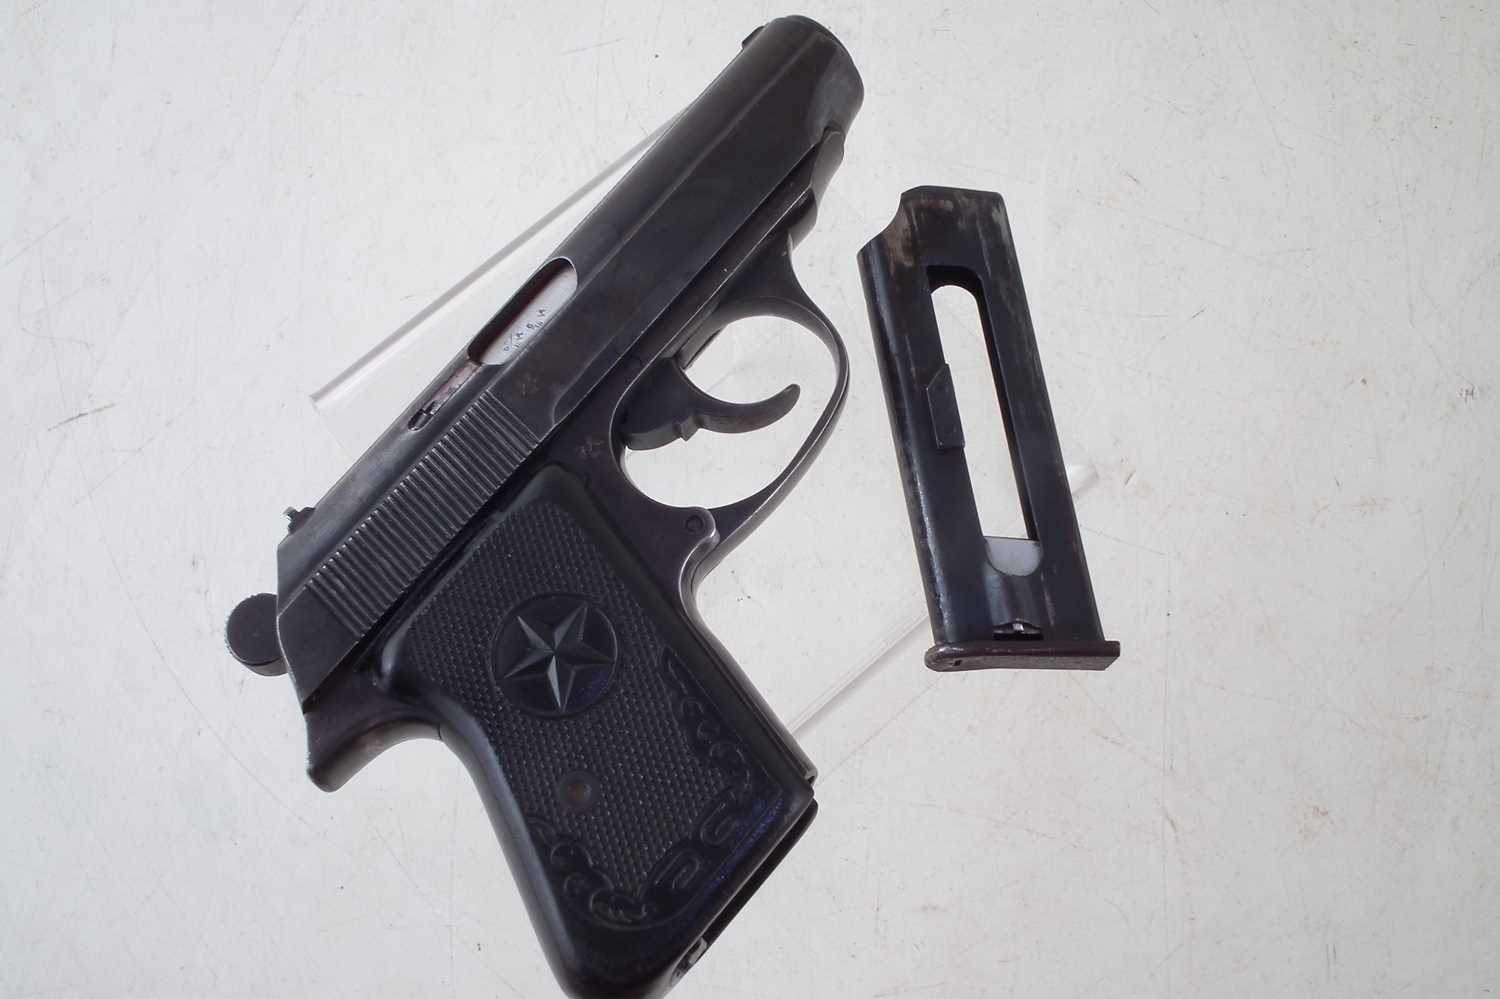 Deactivated Chinese Type 64 7.65mm PPK pistol - Image 5 of 6